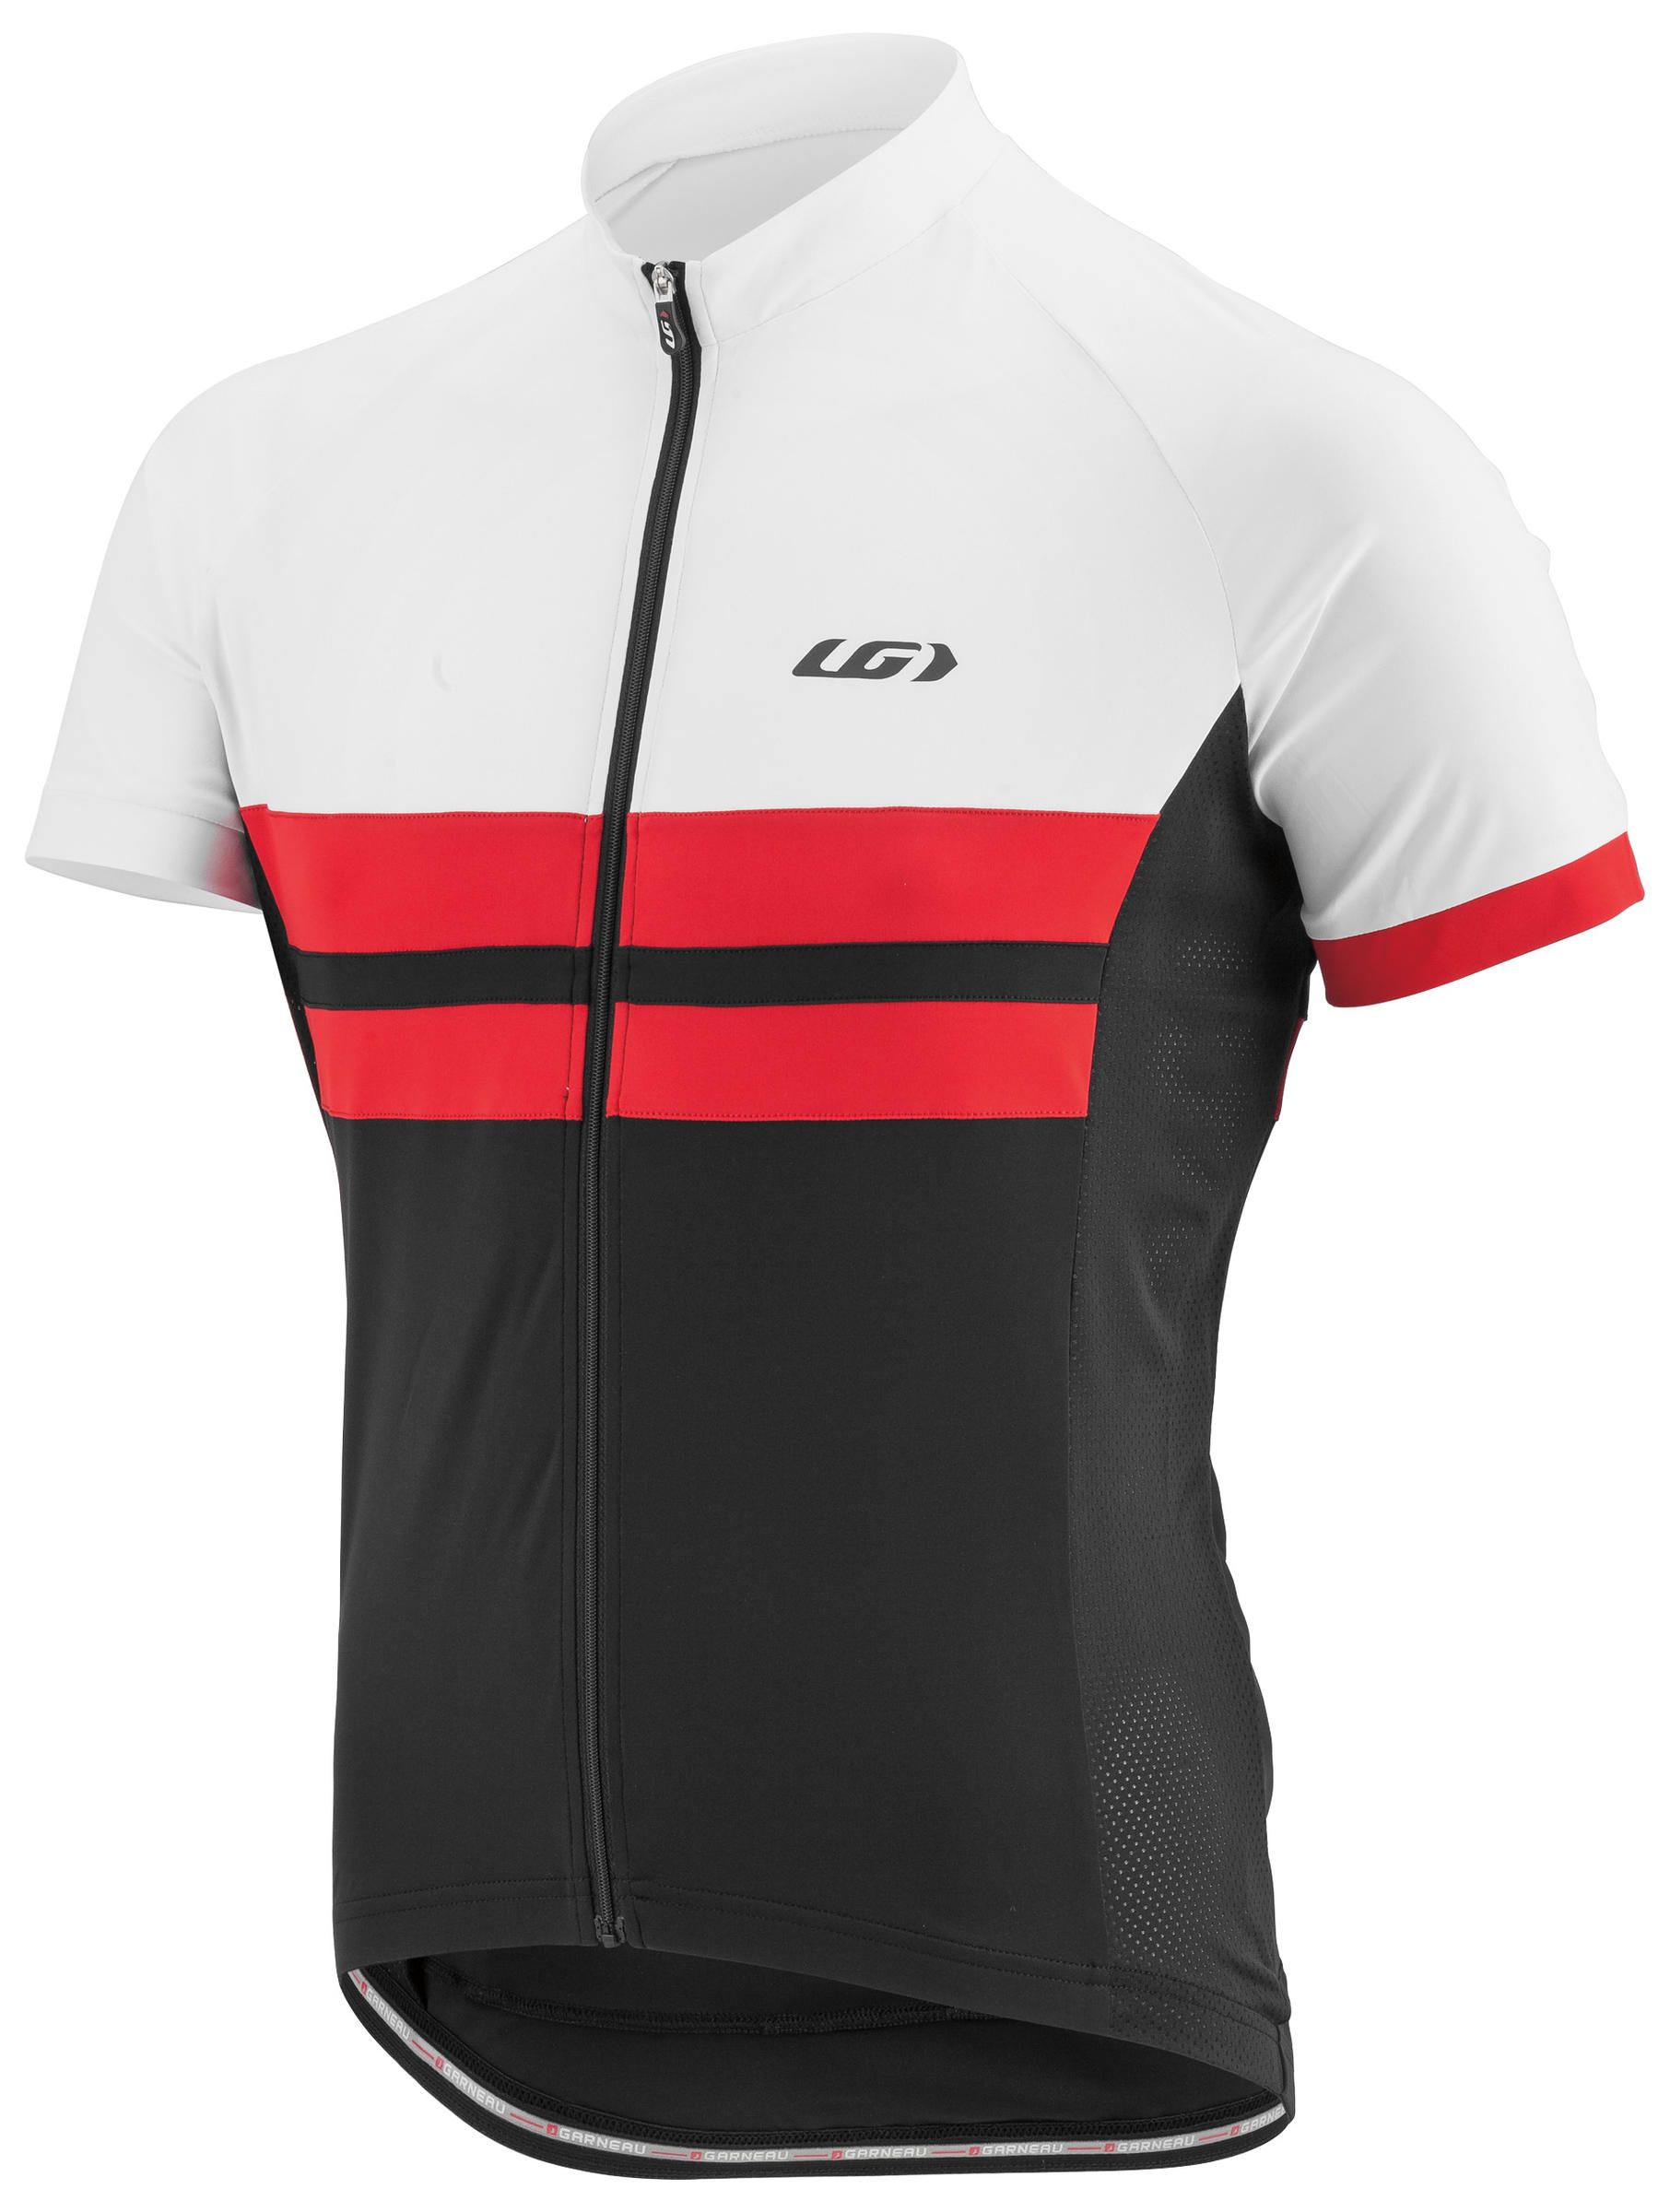 red black and white jersey